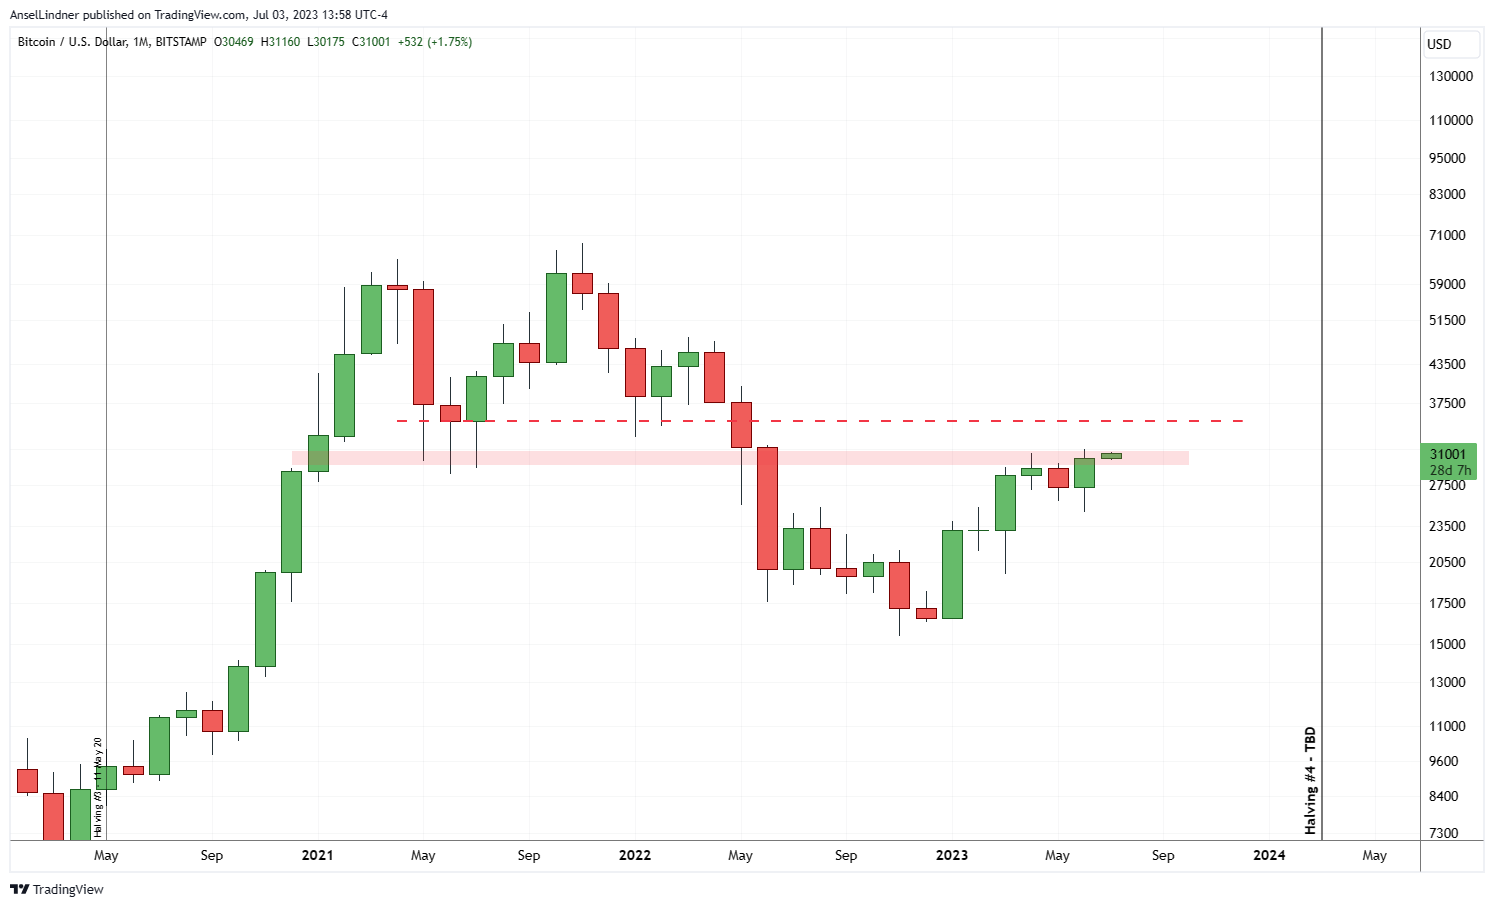 Bitcoin monthly chart